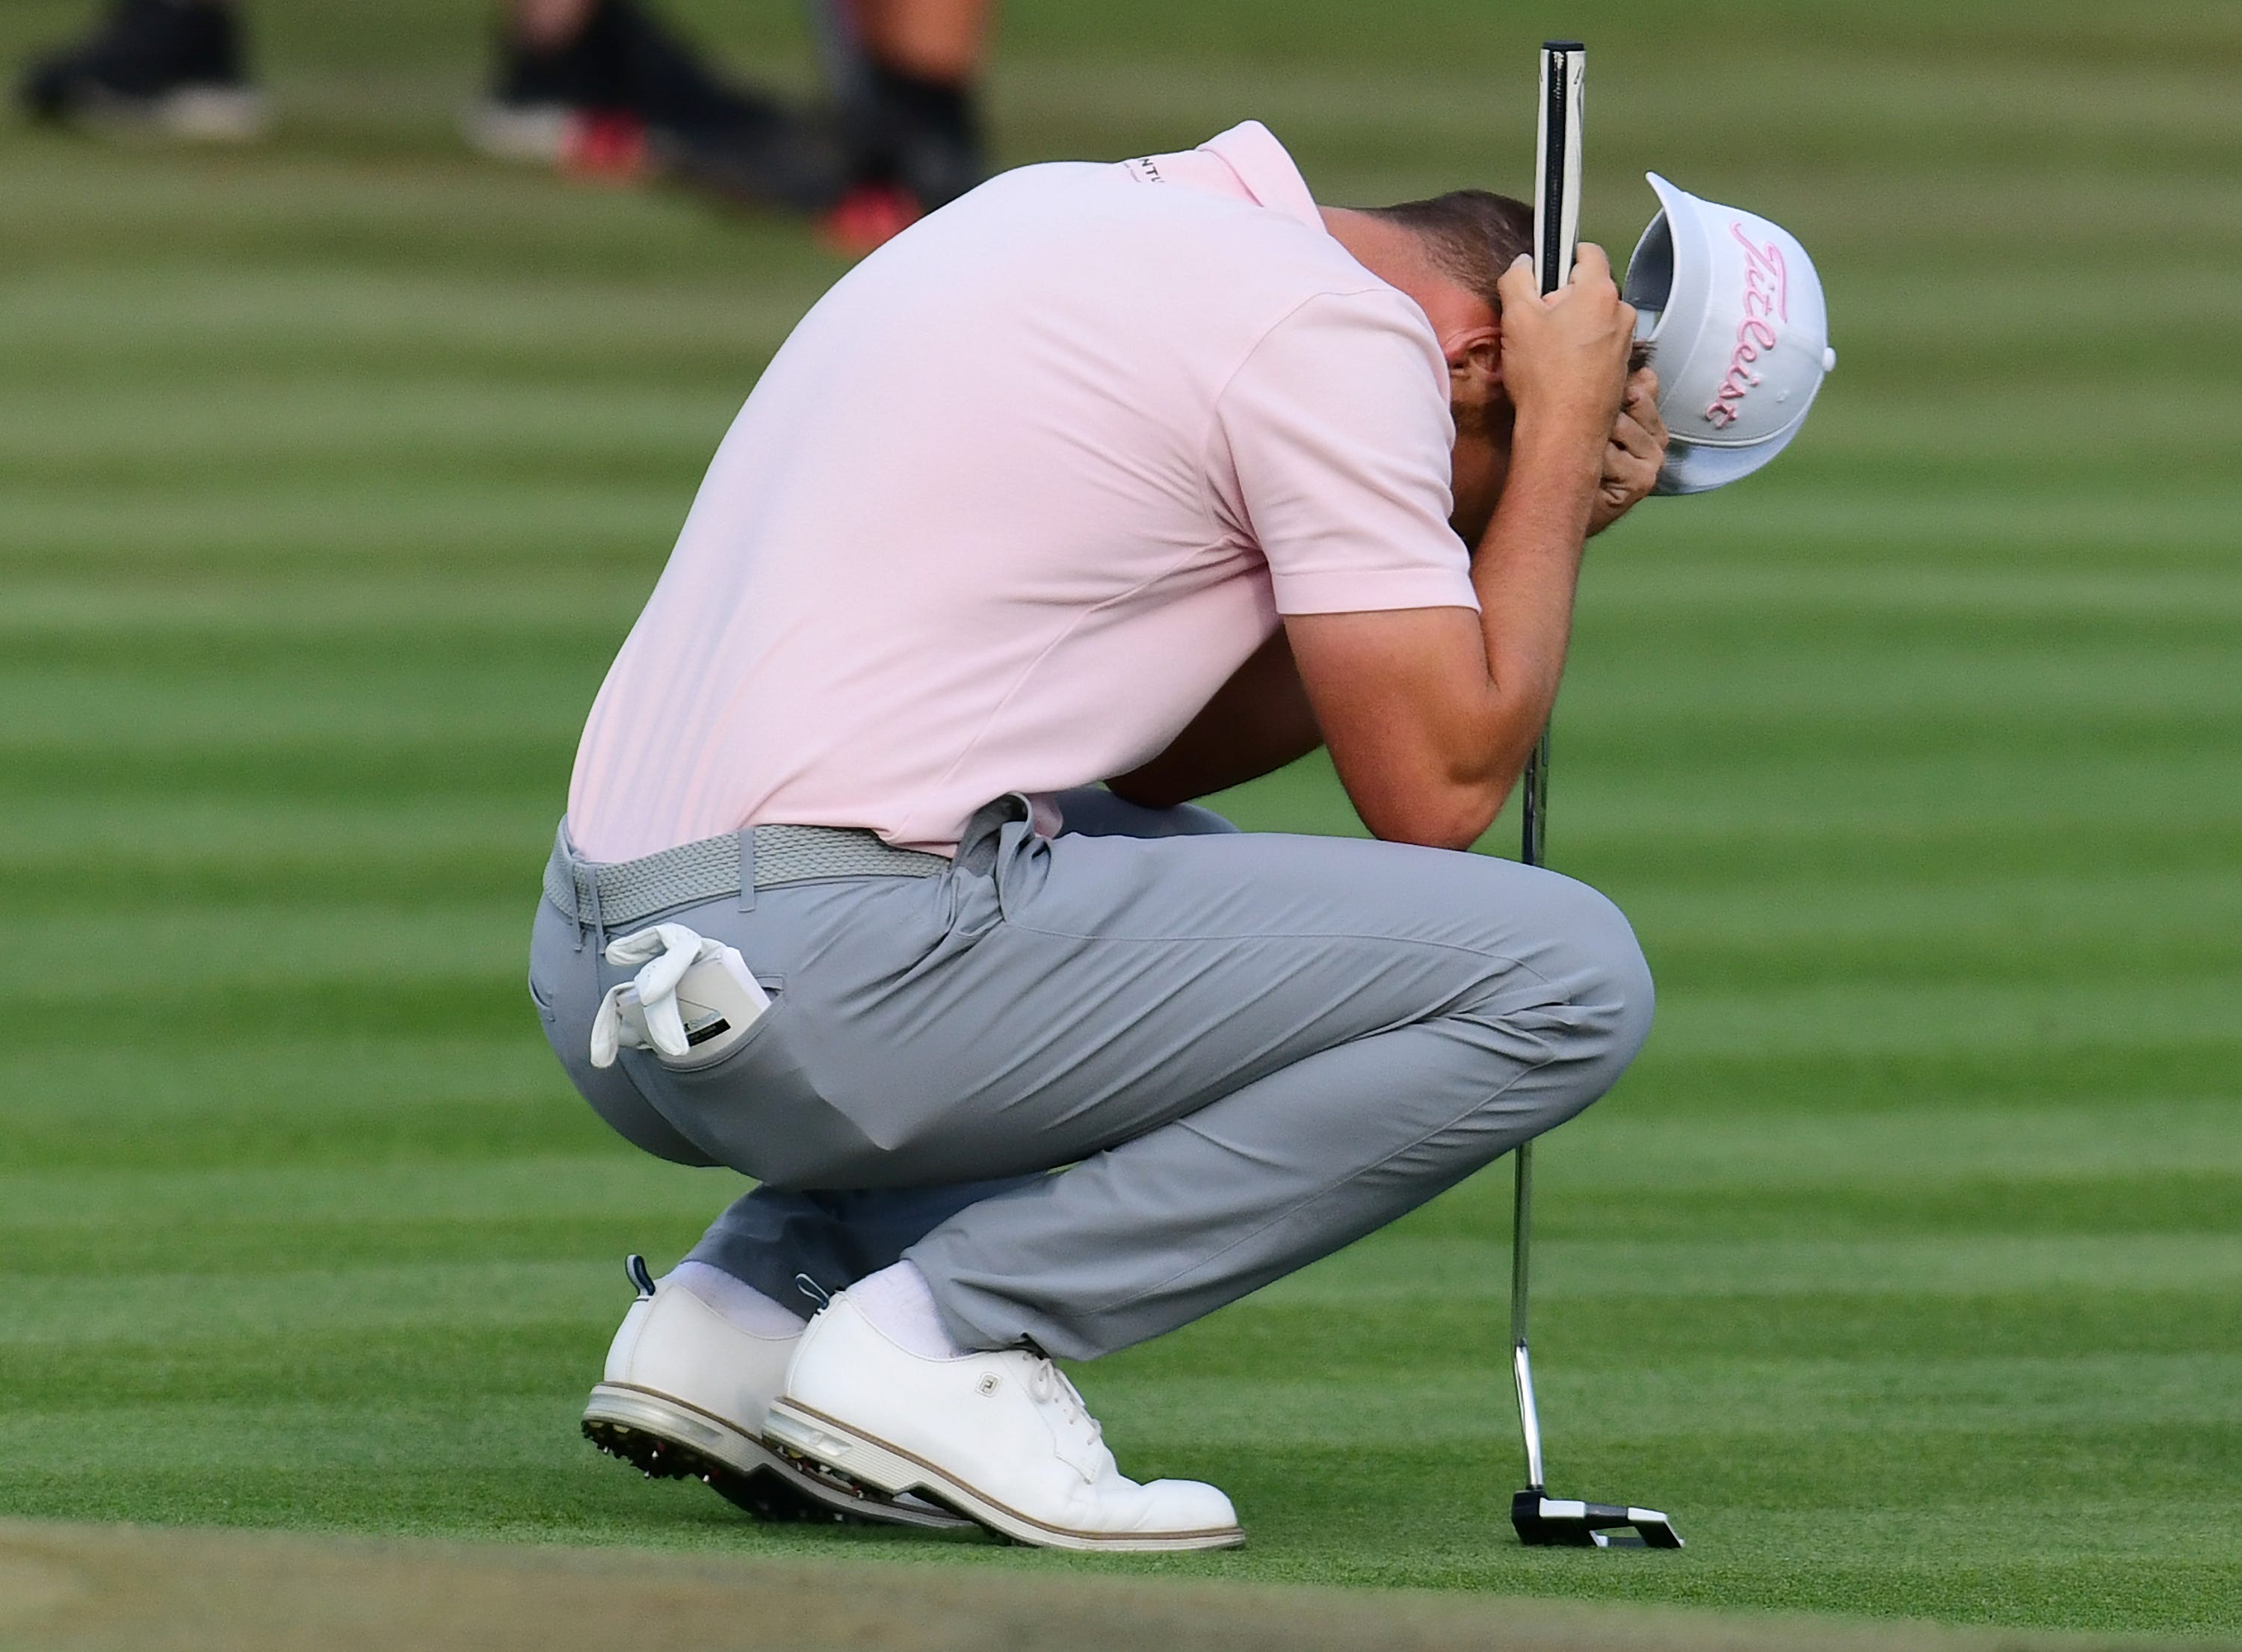 Wyndham Clark reacts after missing a close birdie putt on hole 18 that would have put him at 20 under par and tied with the lead during the fourth and final round of The Players Championship PGA golf tournament Sunday, March 17, 2024 at TPC Sawgrass in Ponte Vedra Beach, Fla.